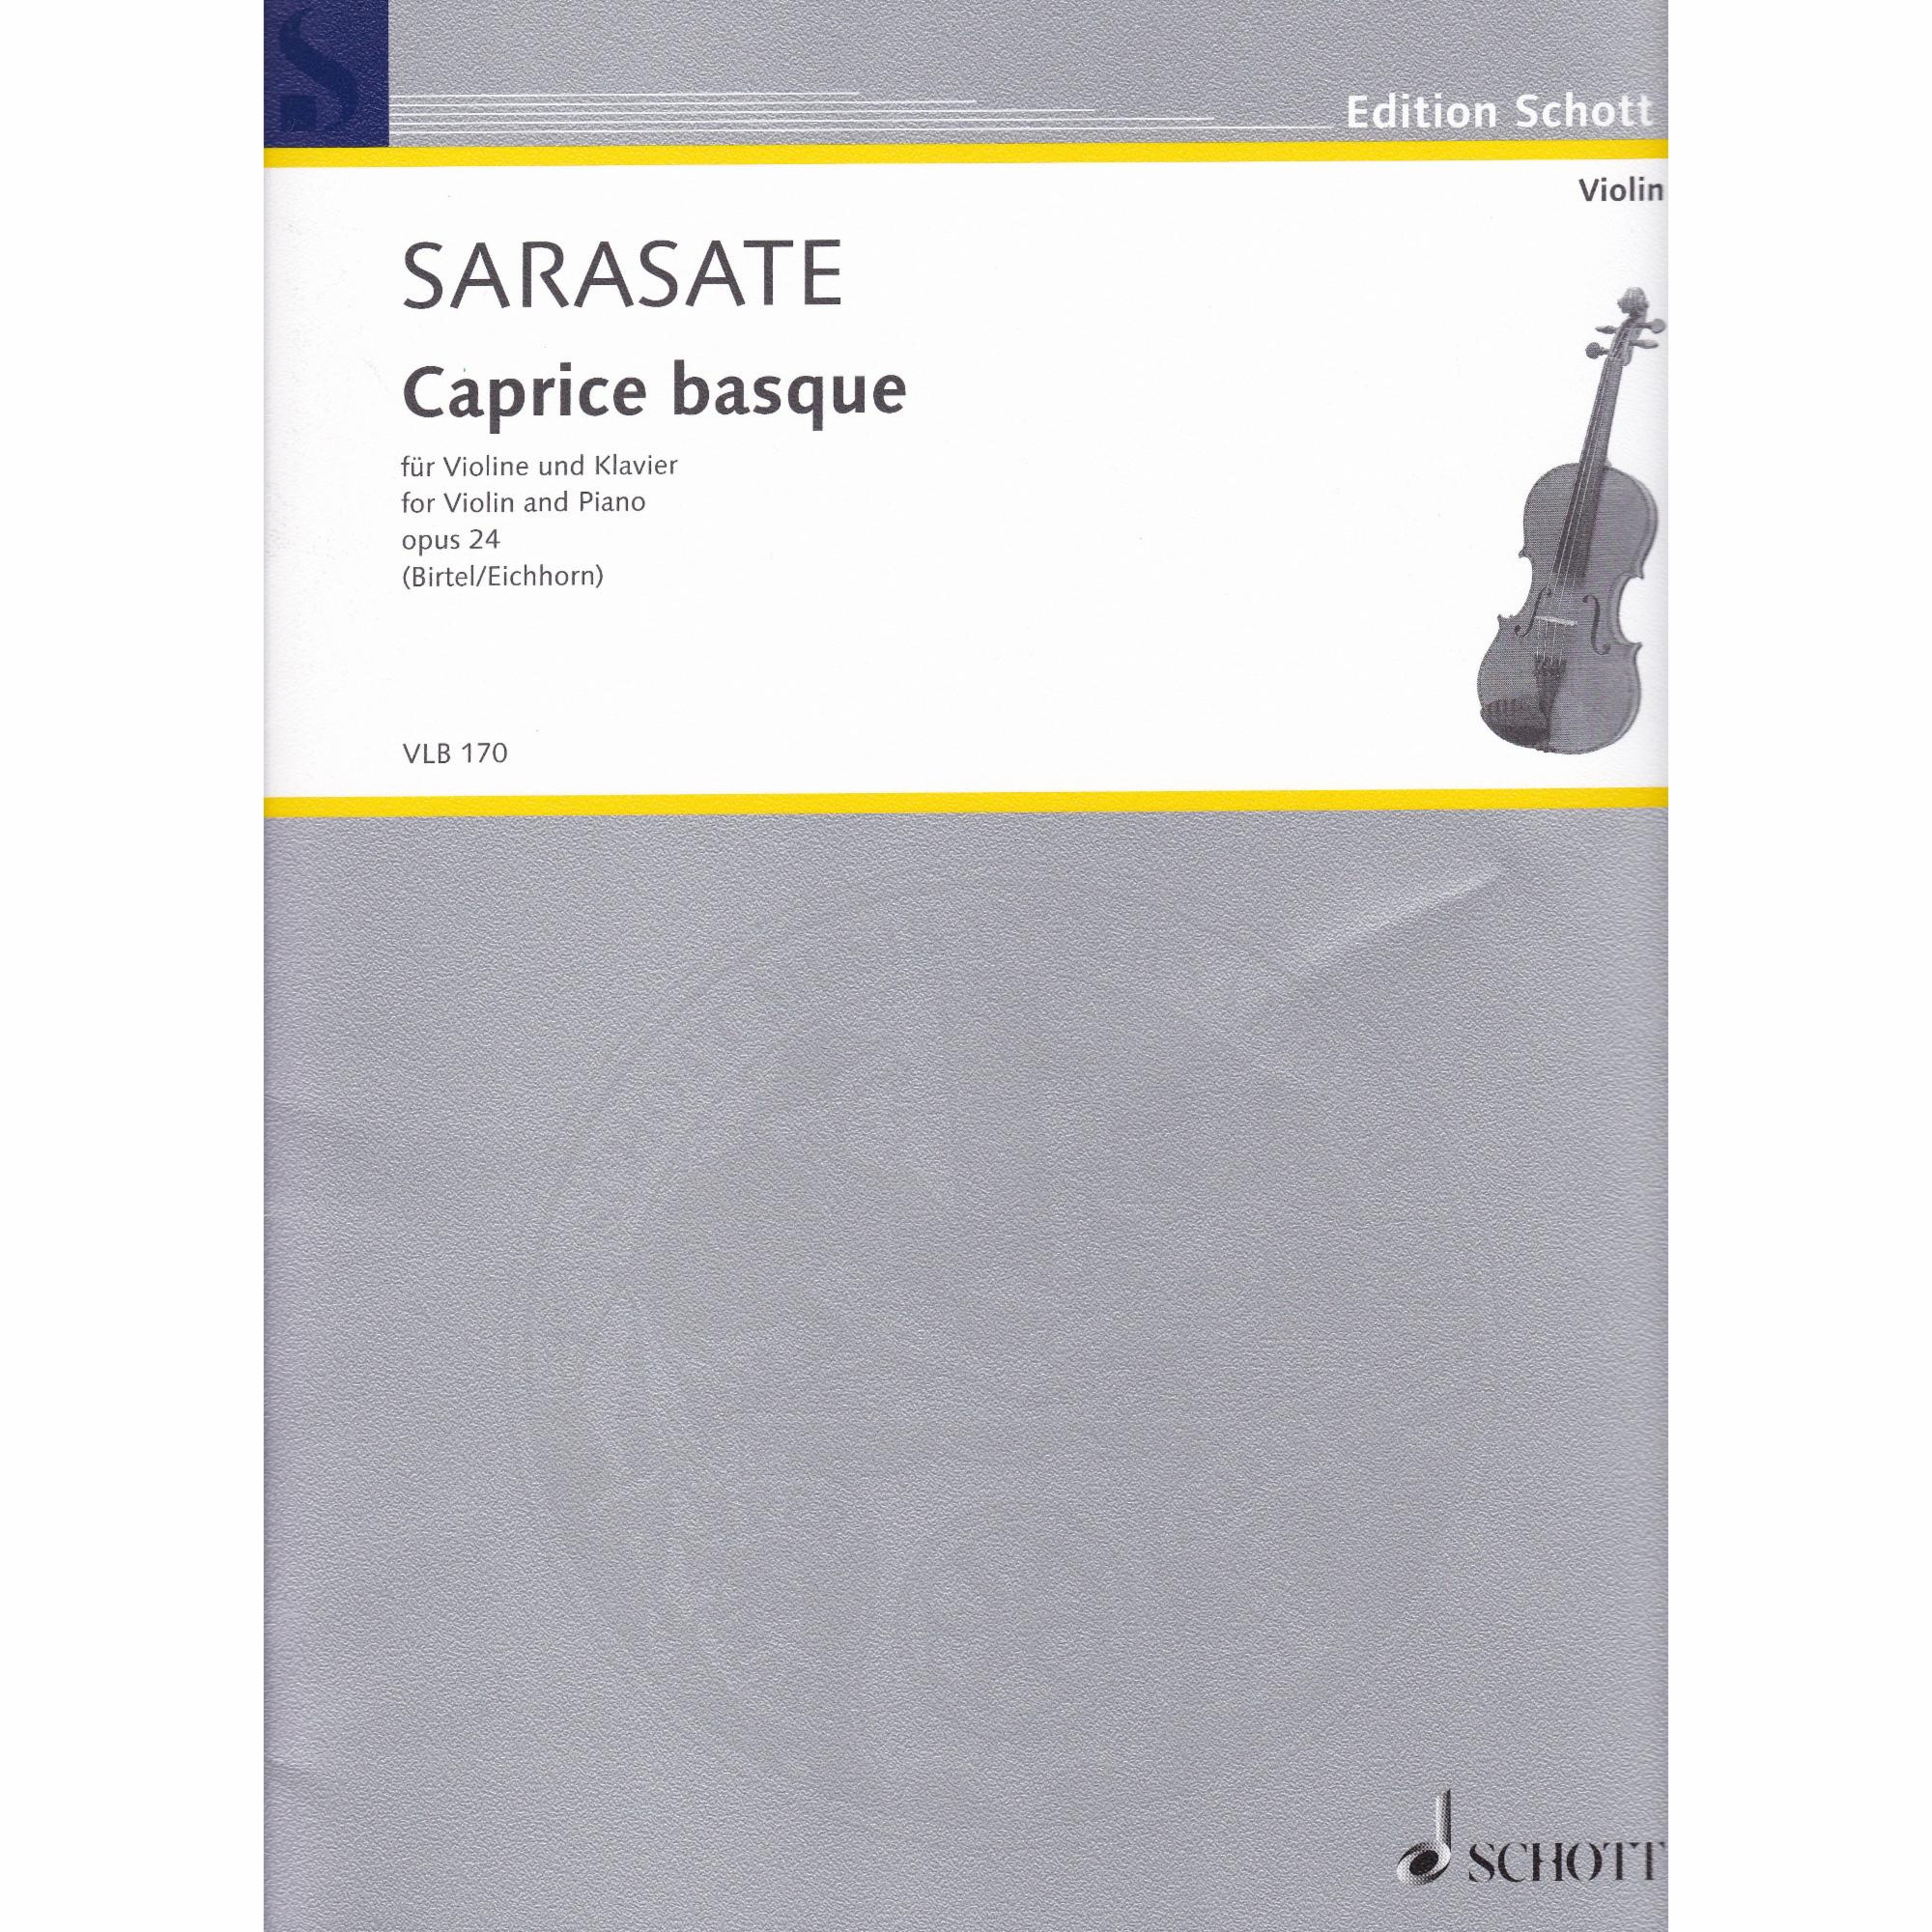 Caprice Basque for Violin and Piano, Op. 24